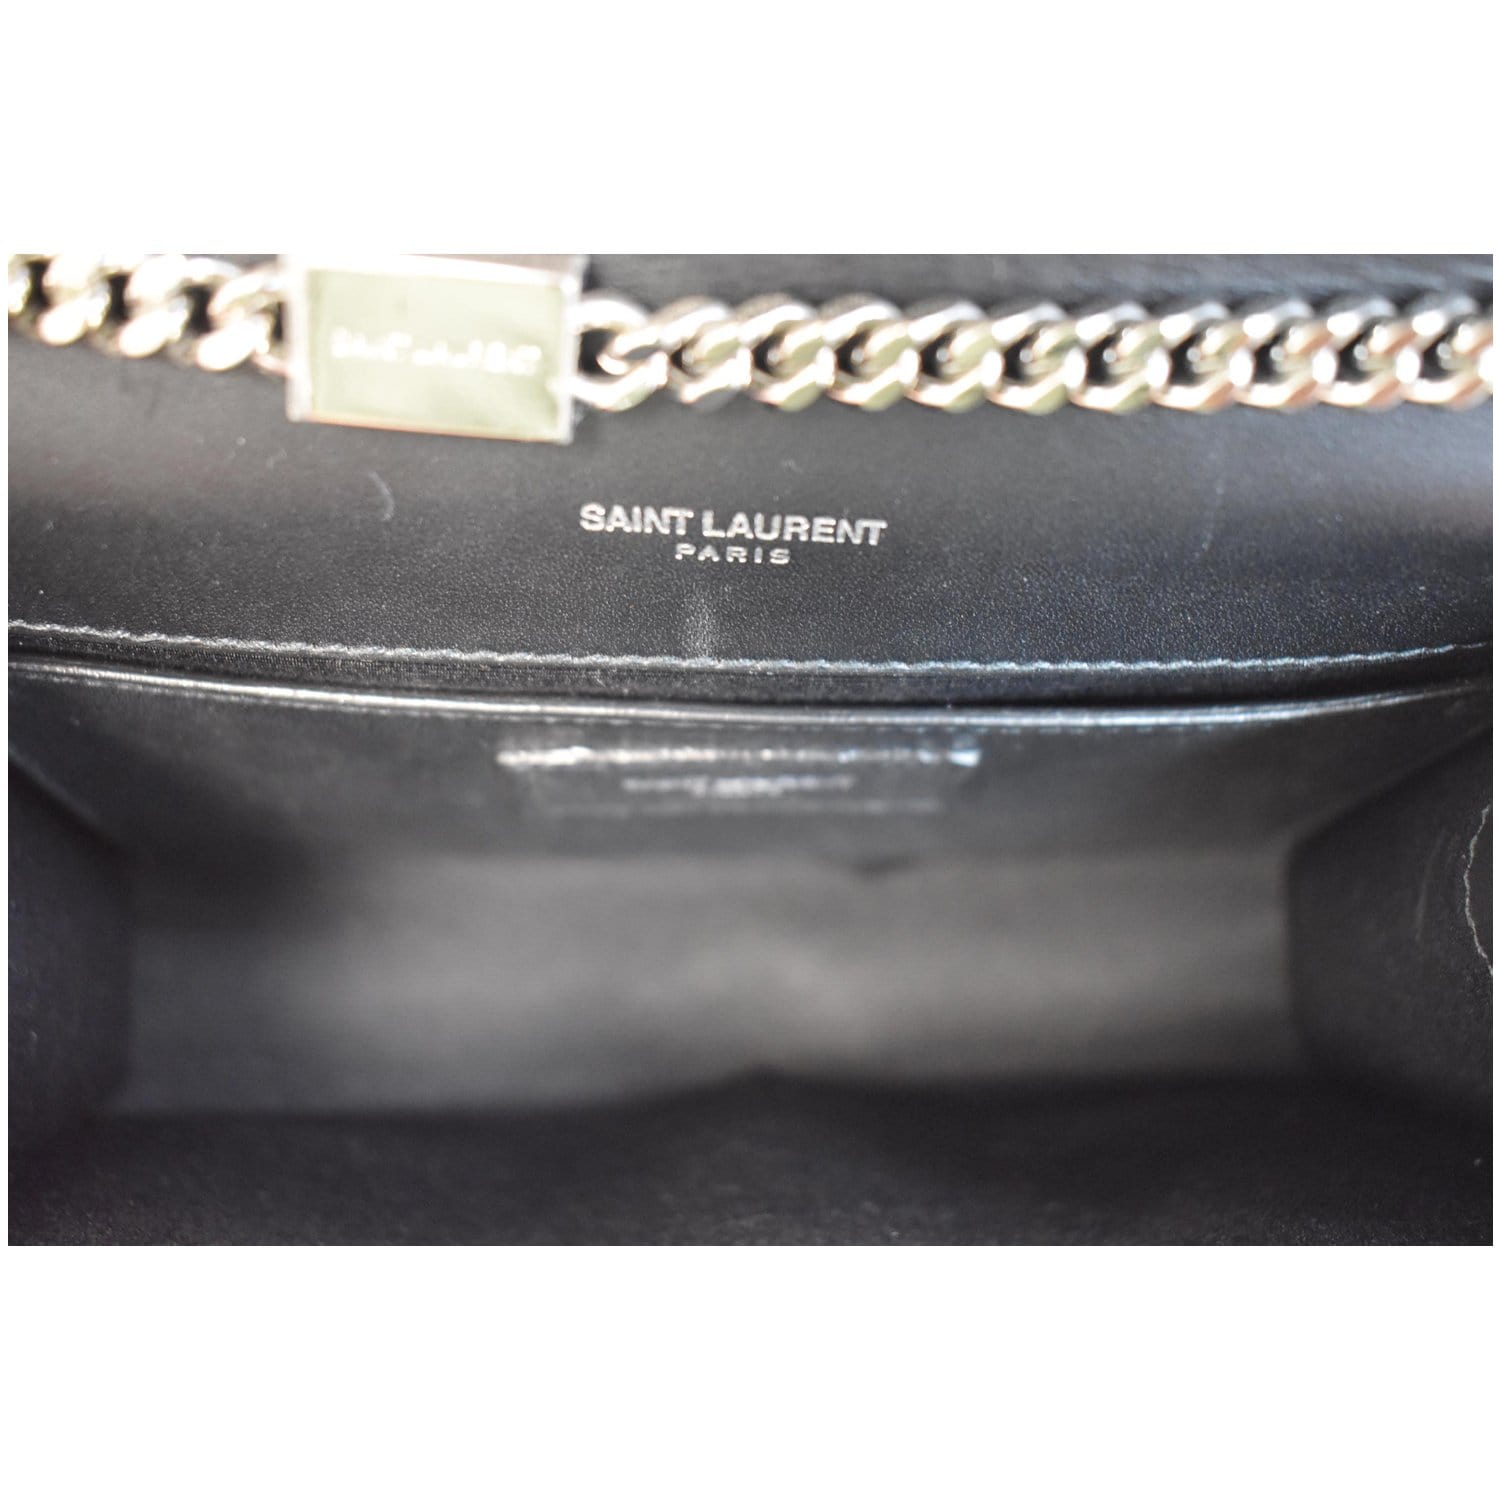 where is the serial number on ysl kate bag